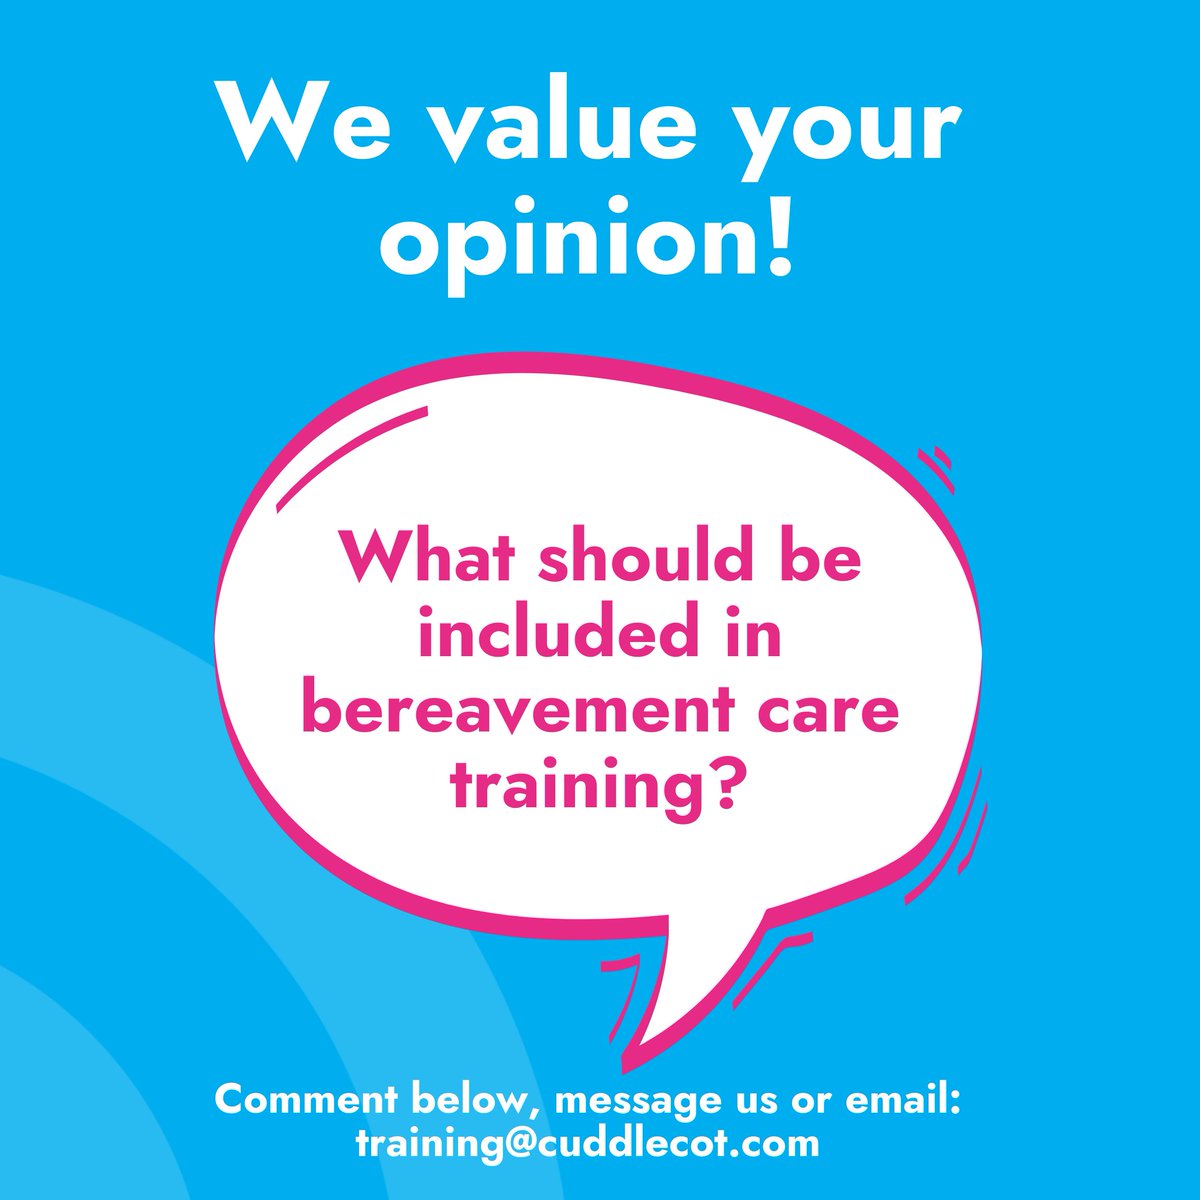 ⭐ What do you think should be included in our training program?
⭐ What do you wish your healthcare professional knew?
⭐ What aspects of bereavement care do you believe are most important for clinicians to understand?
#BereavementCare #ClinicianTraining #BabyLoss
#InfantLoss